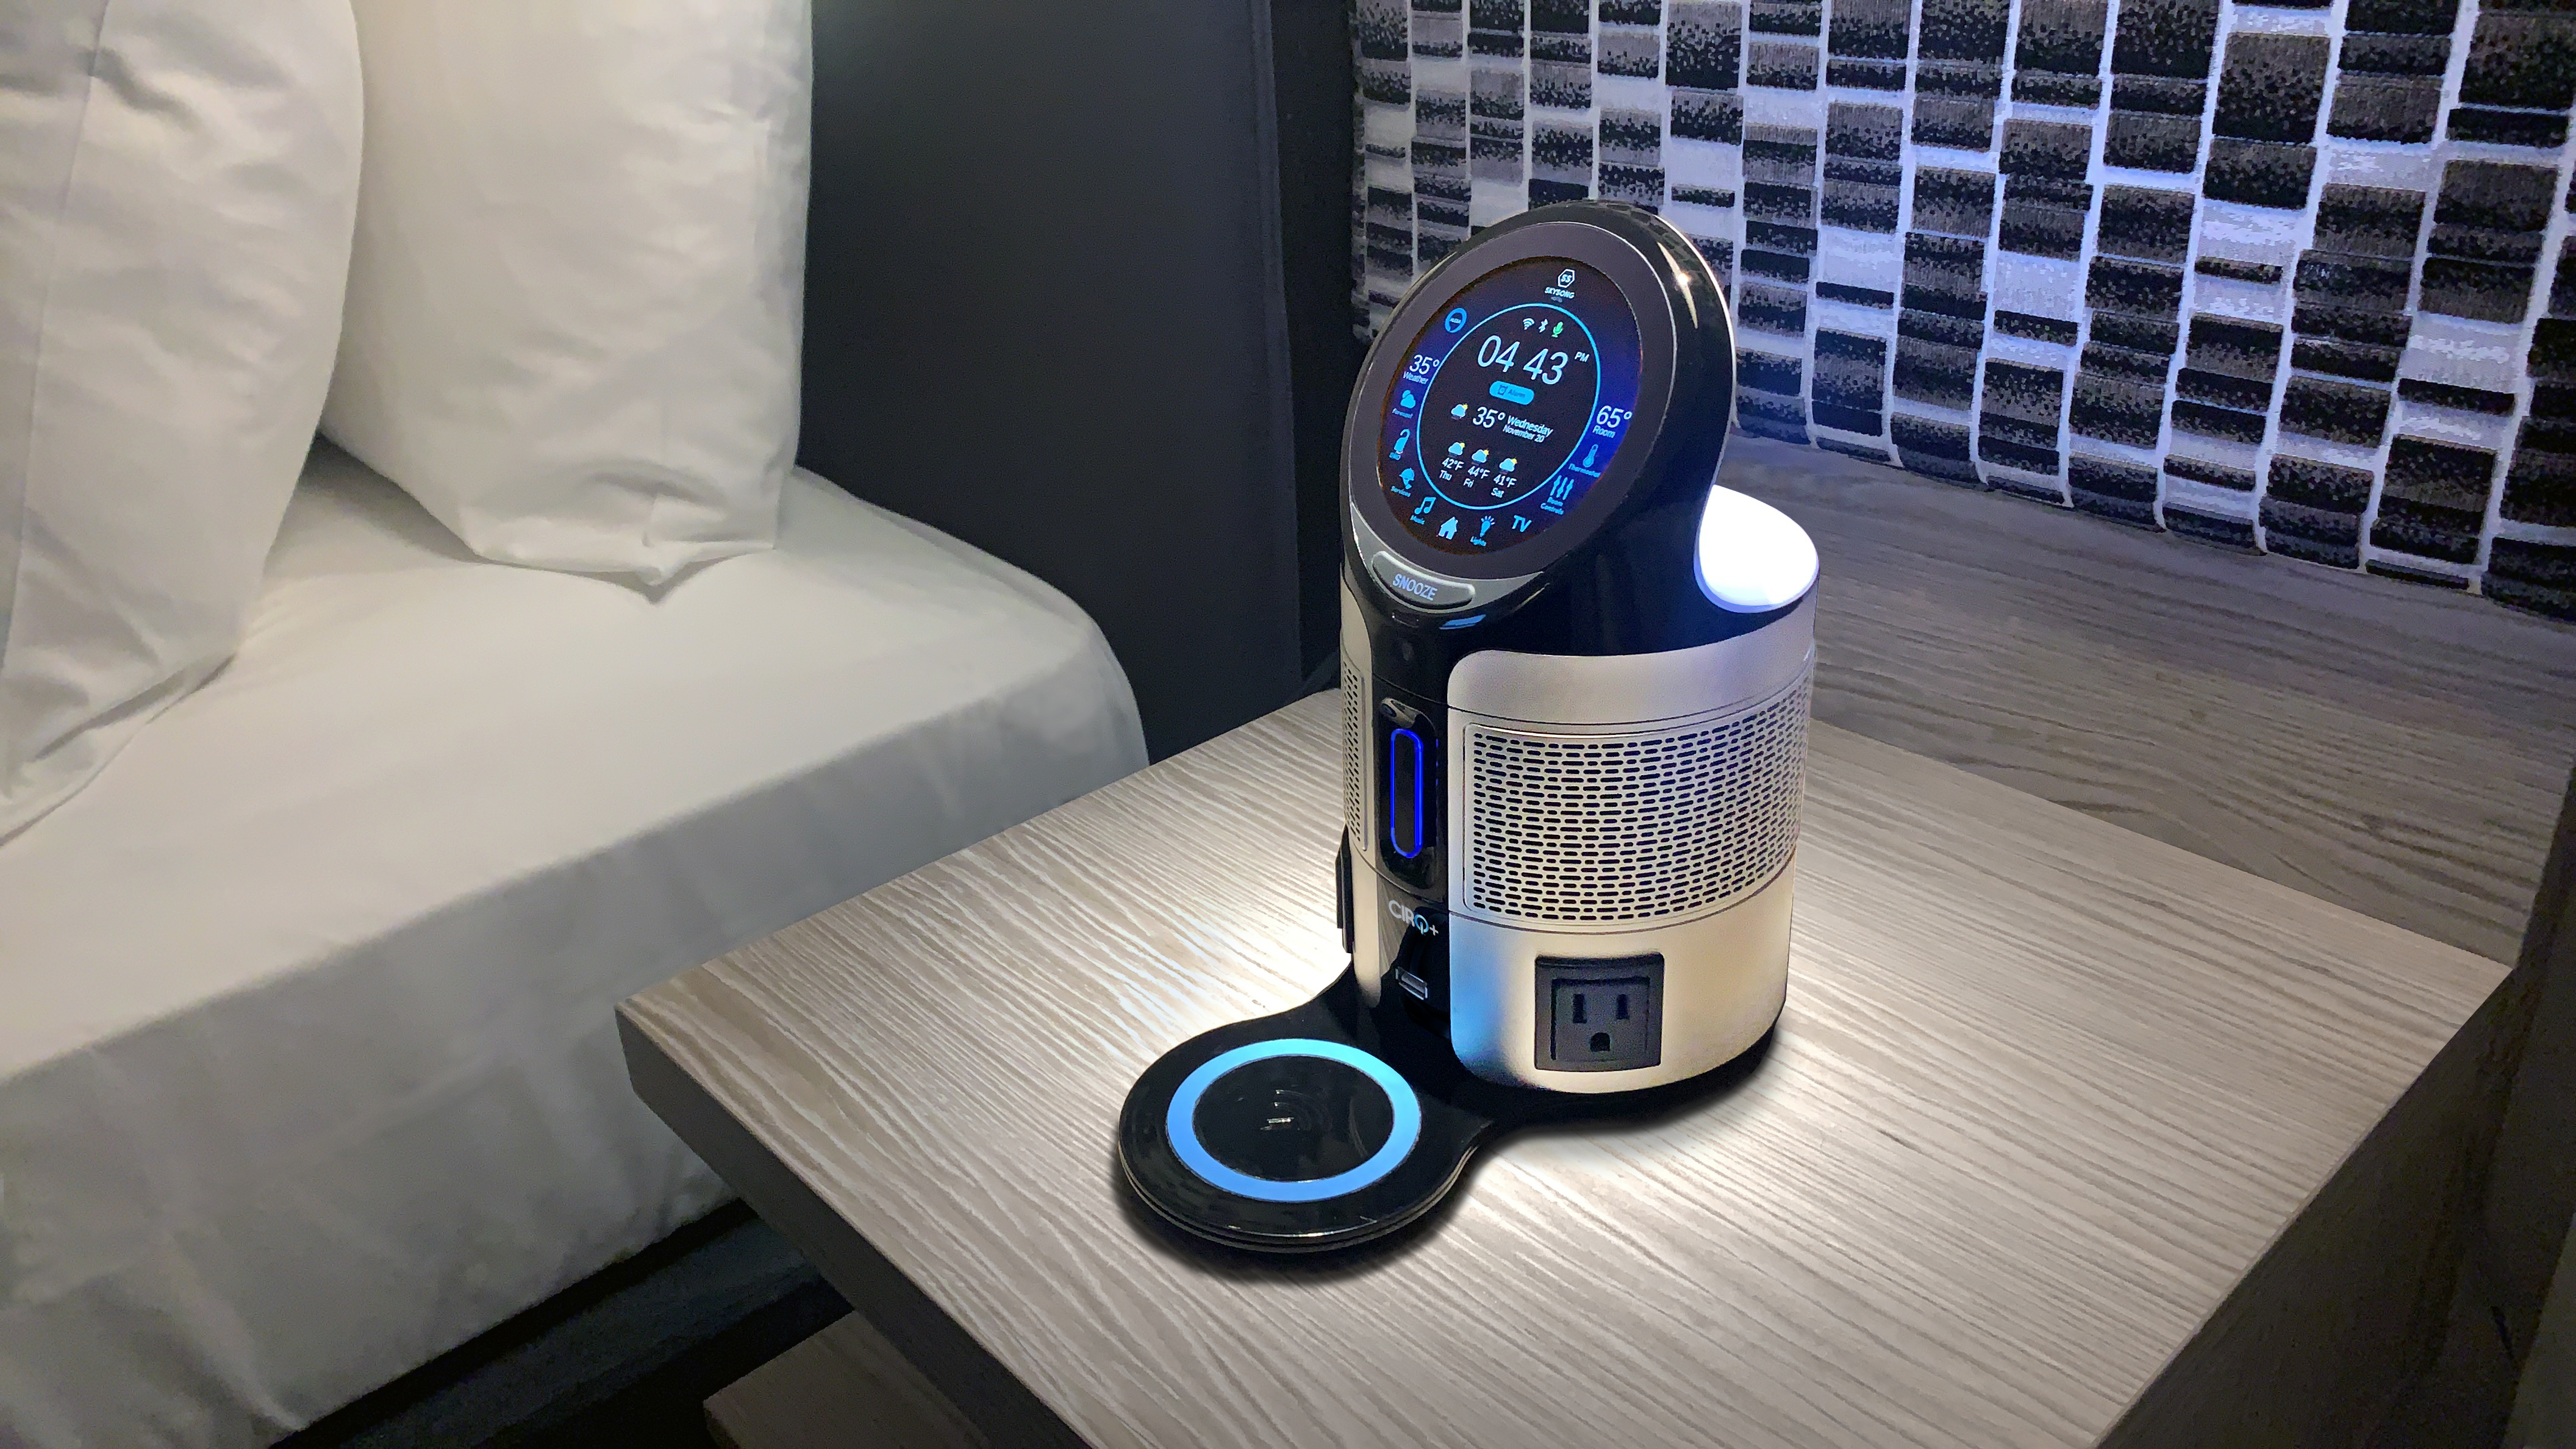 When guests enter their hotel rooms they can speak commands to the Cirq supported voice assistant selected by the hotel Am